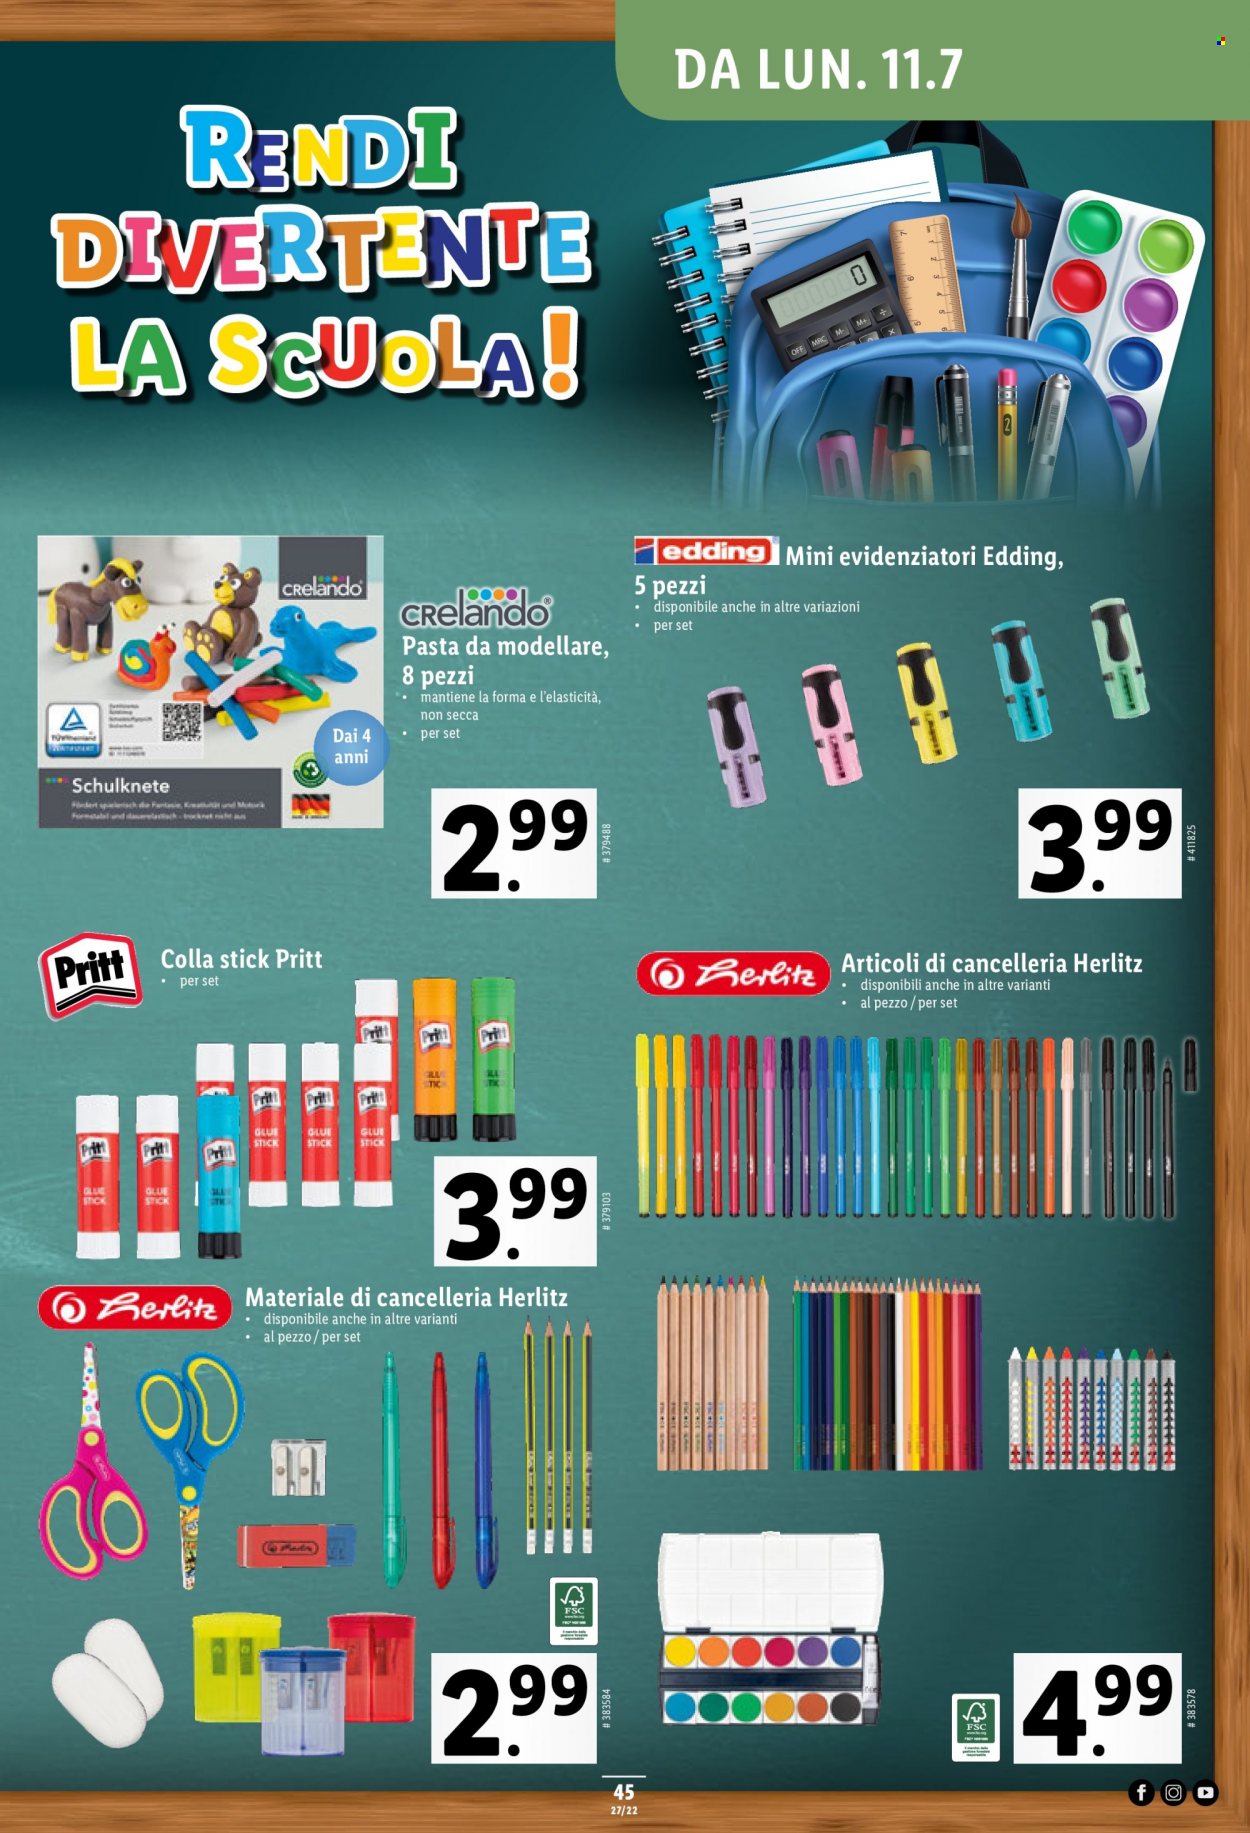 Catalogue Lidl - 7.7.2022 - 13.7.2022. Page 45.